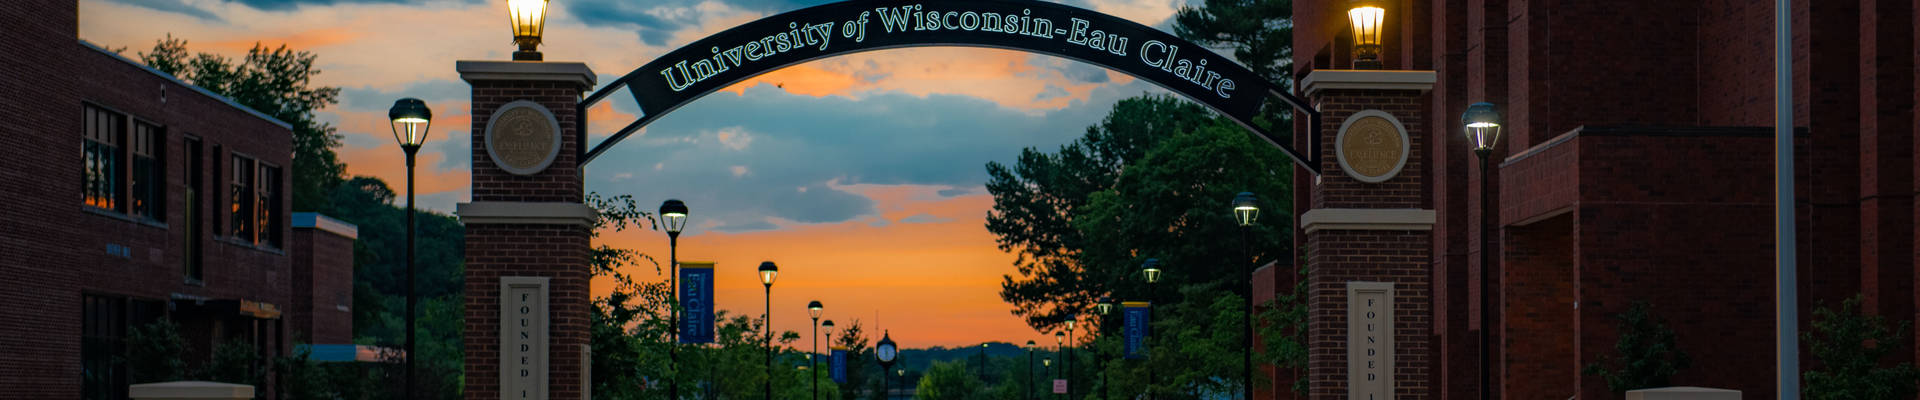 An evening picture of the UW-Eau Claire entrance gate with arch.